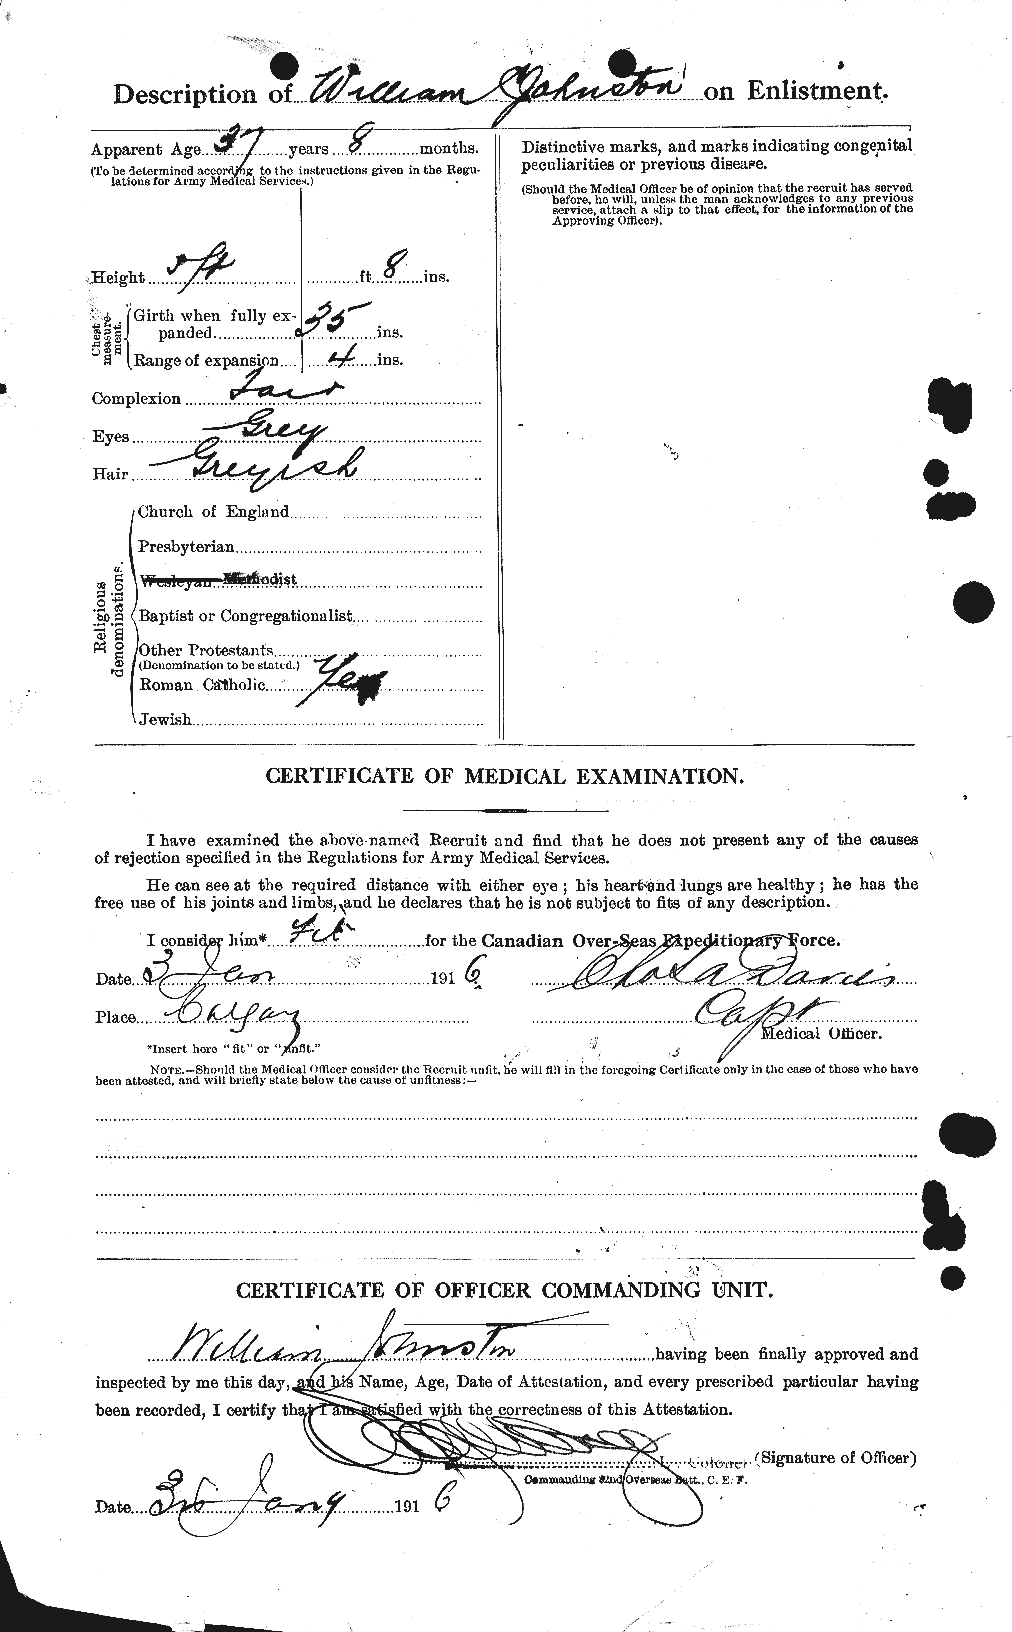 Personnel Records of the First World War - CEF 427314b